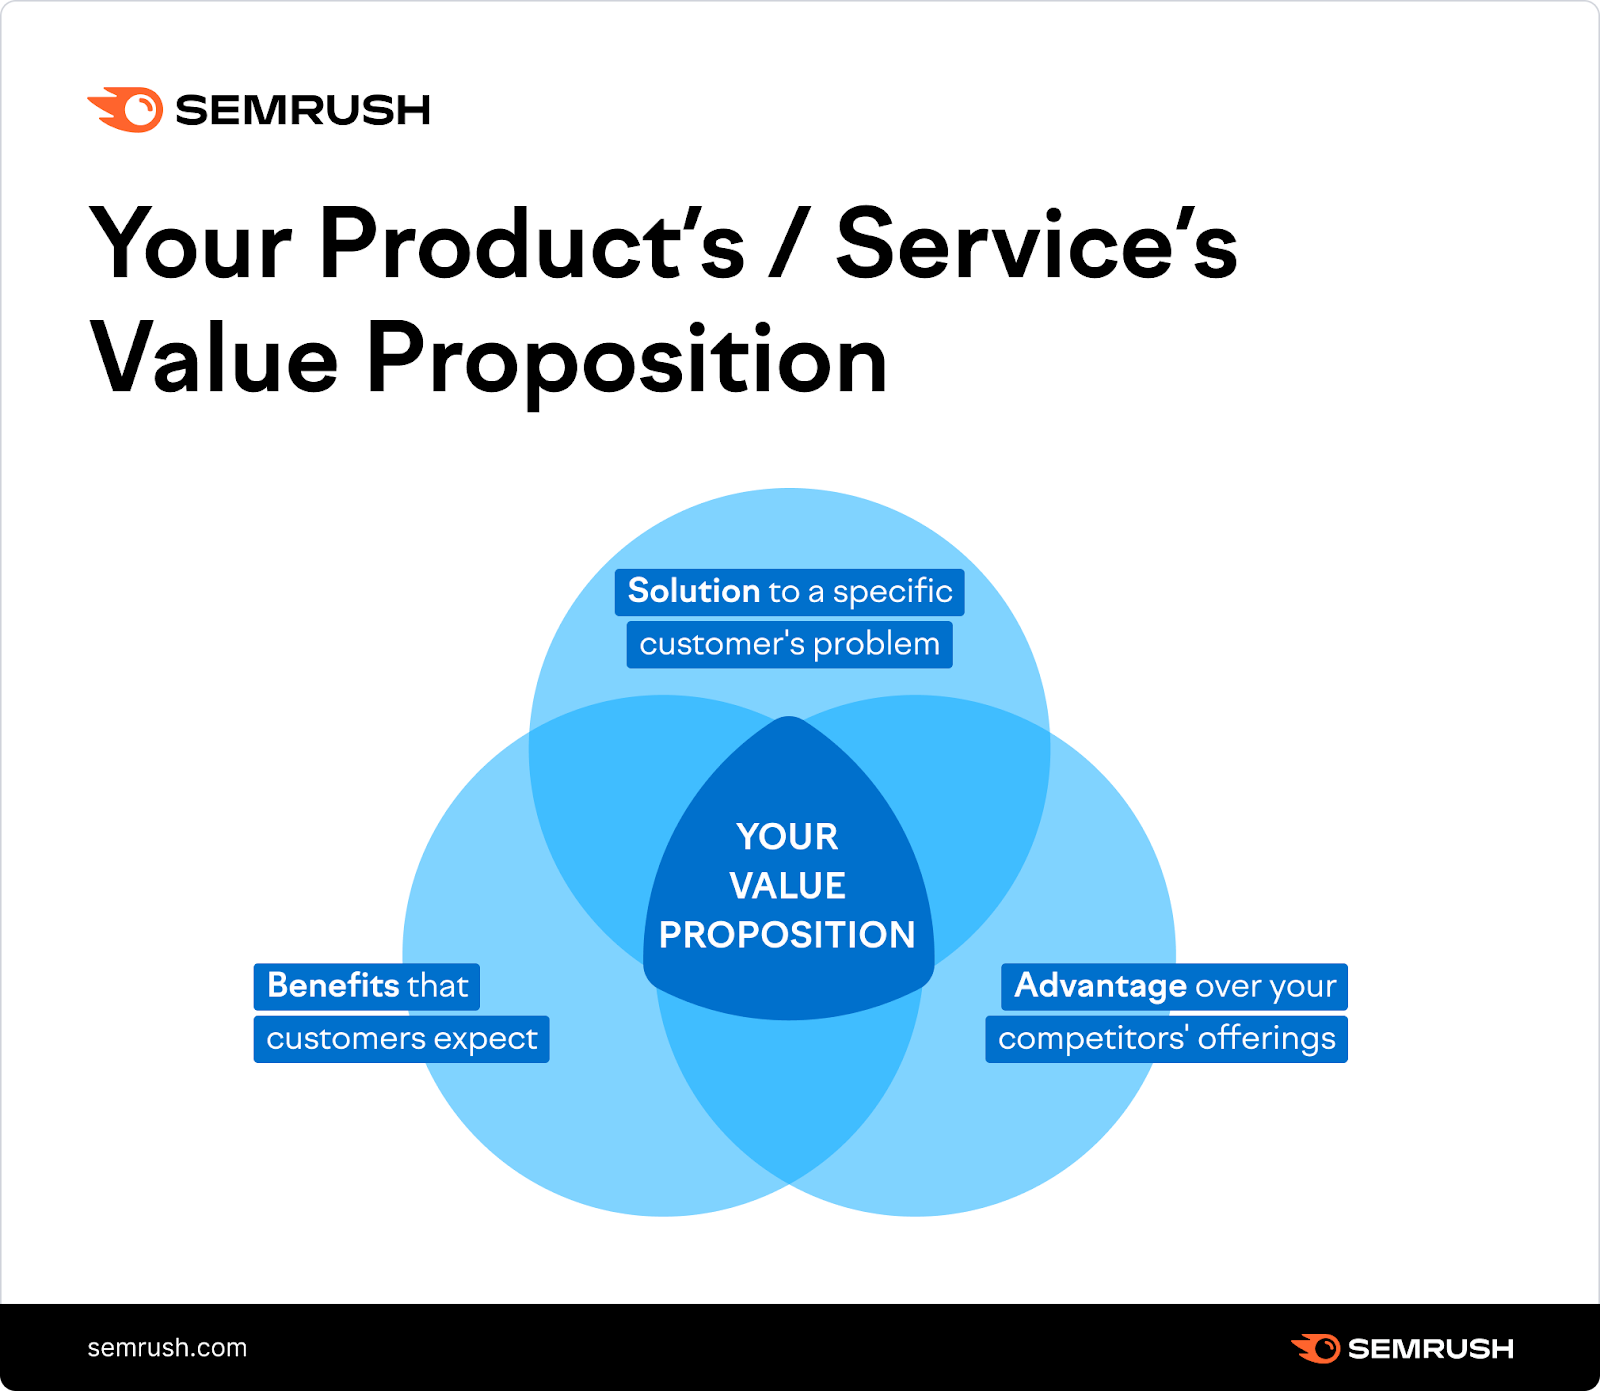 value proposition venn diagram with benefits, solutions, and advantages converging in the center